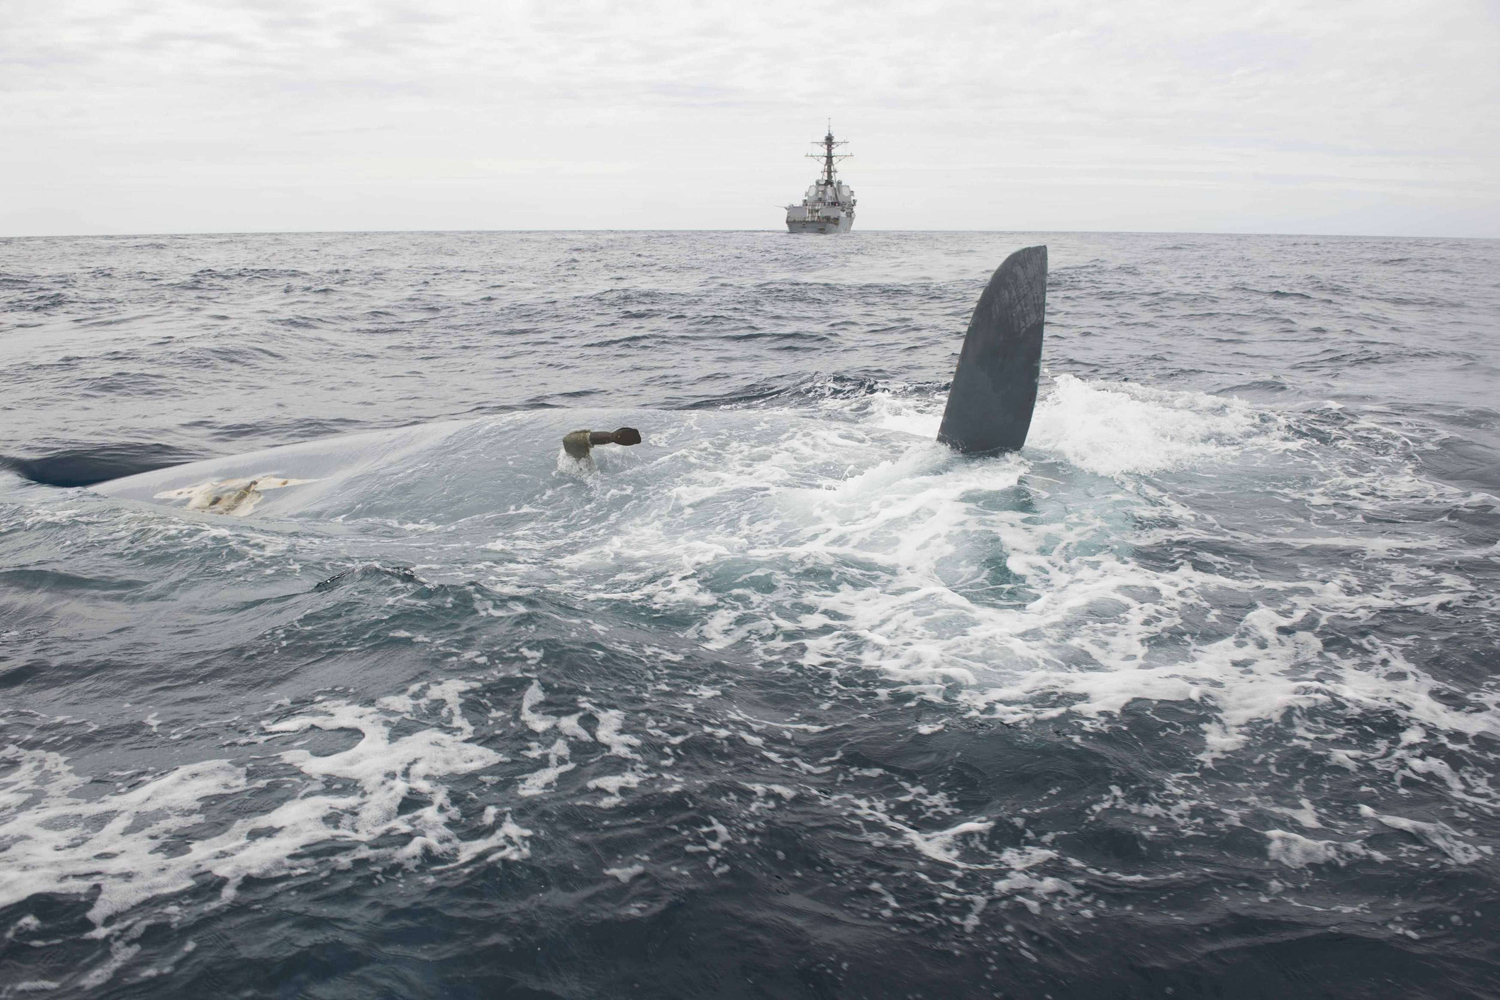 May 23, 2014. The overturned hull of the Cheeki Rafiki, as discovered by a U.S. Navy warship east of Cape Cod, Massachusetts.